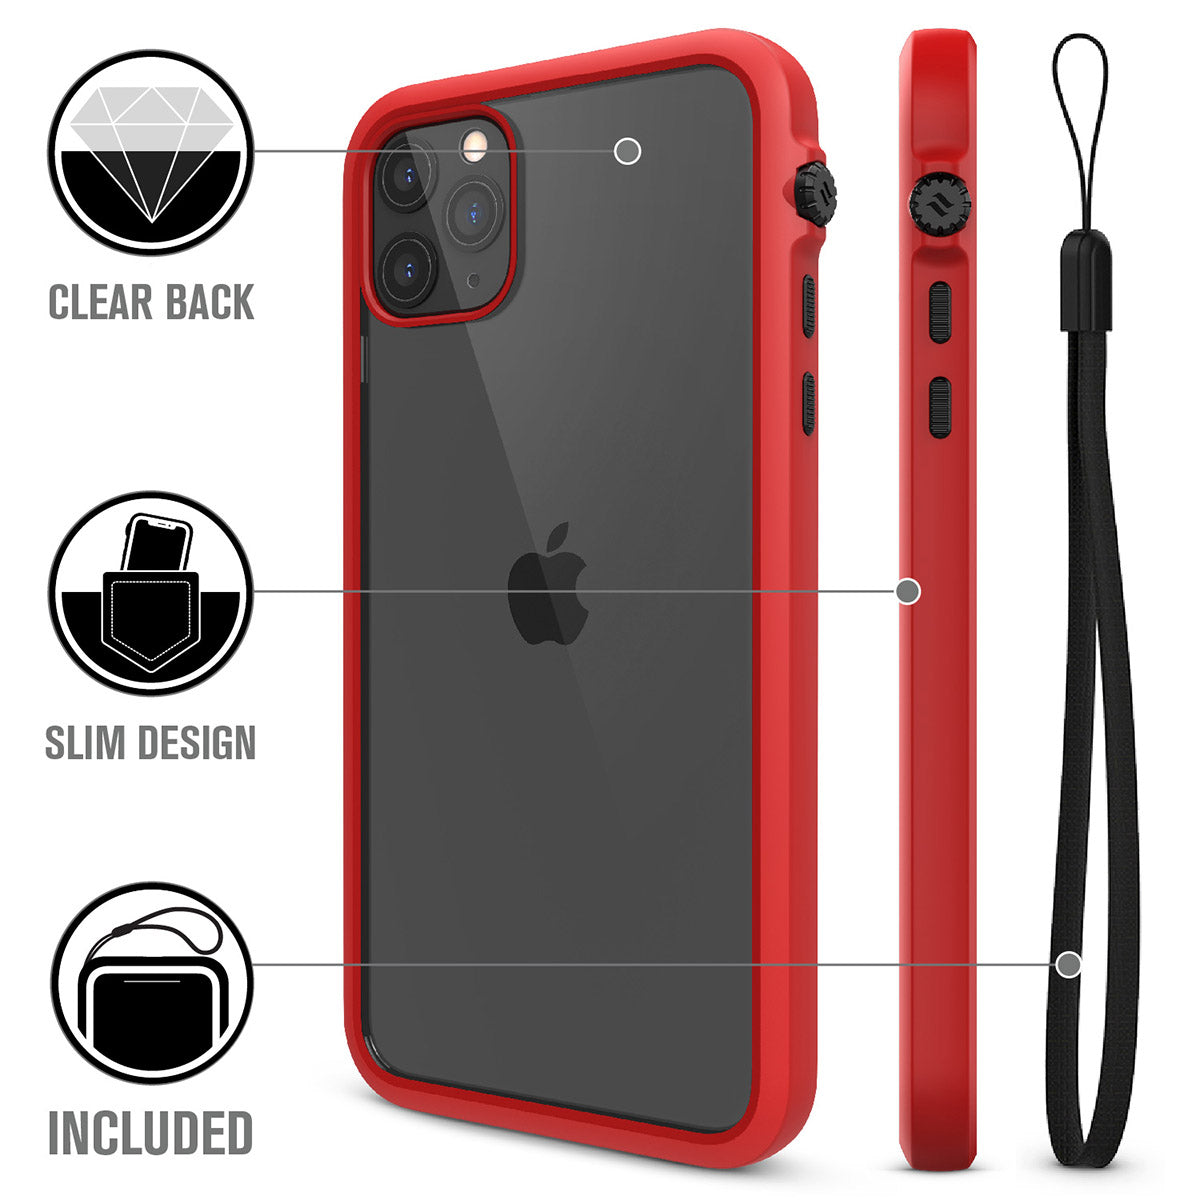 catalyst iPhone 11 series impact protection case flame red showing the back view and buttons of the case for iPhone 11 pro max and a lanyard text reads clear back slim design included